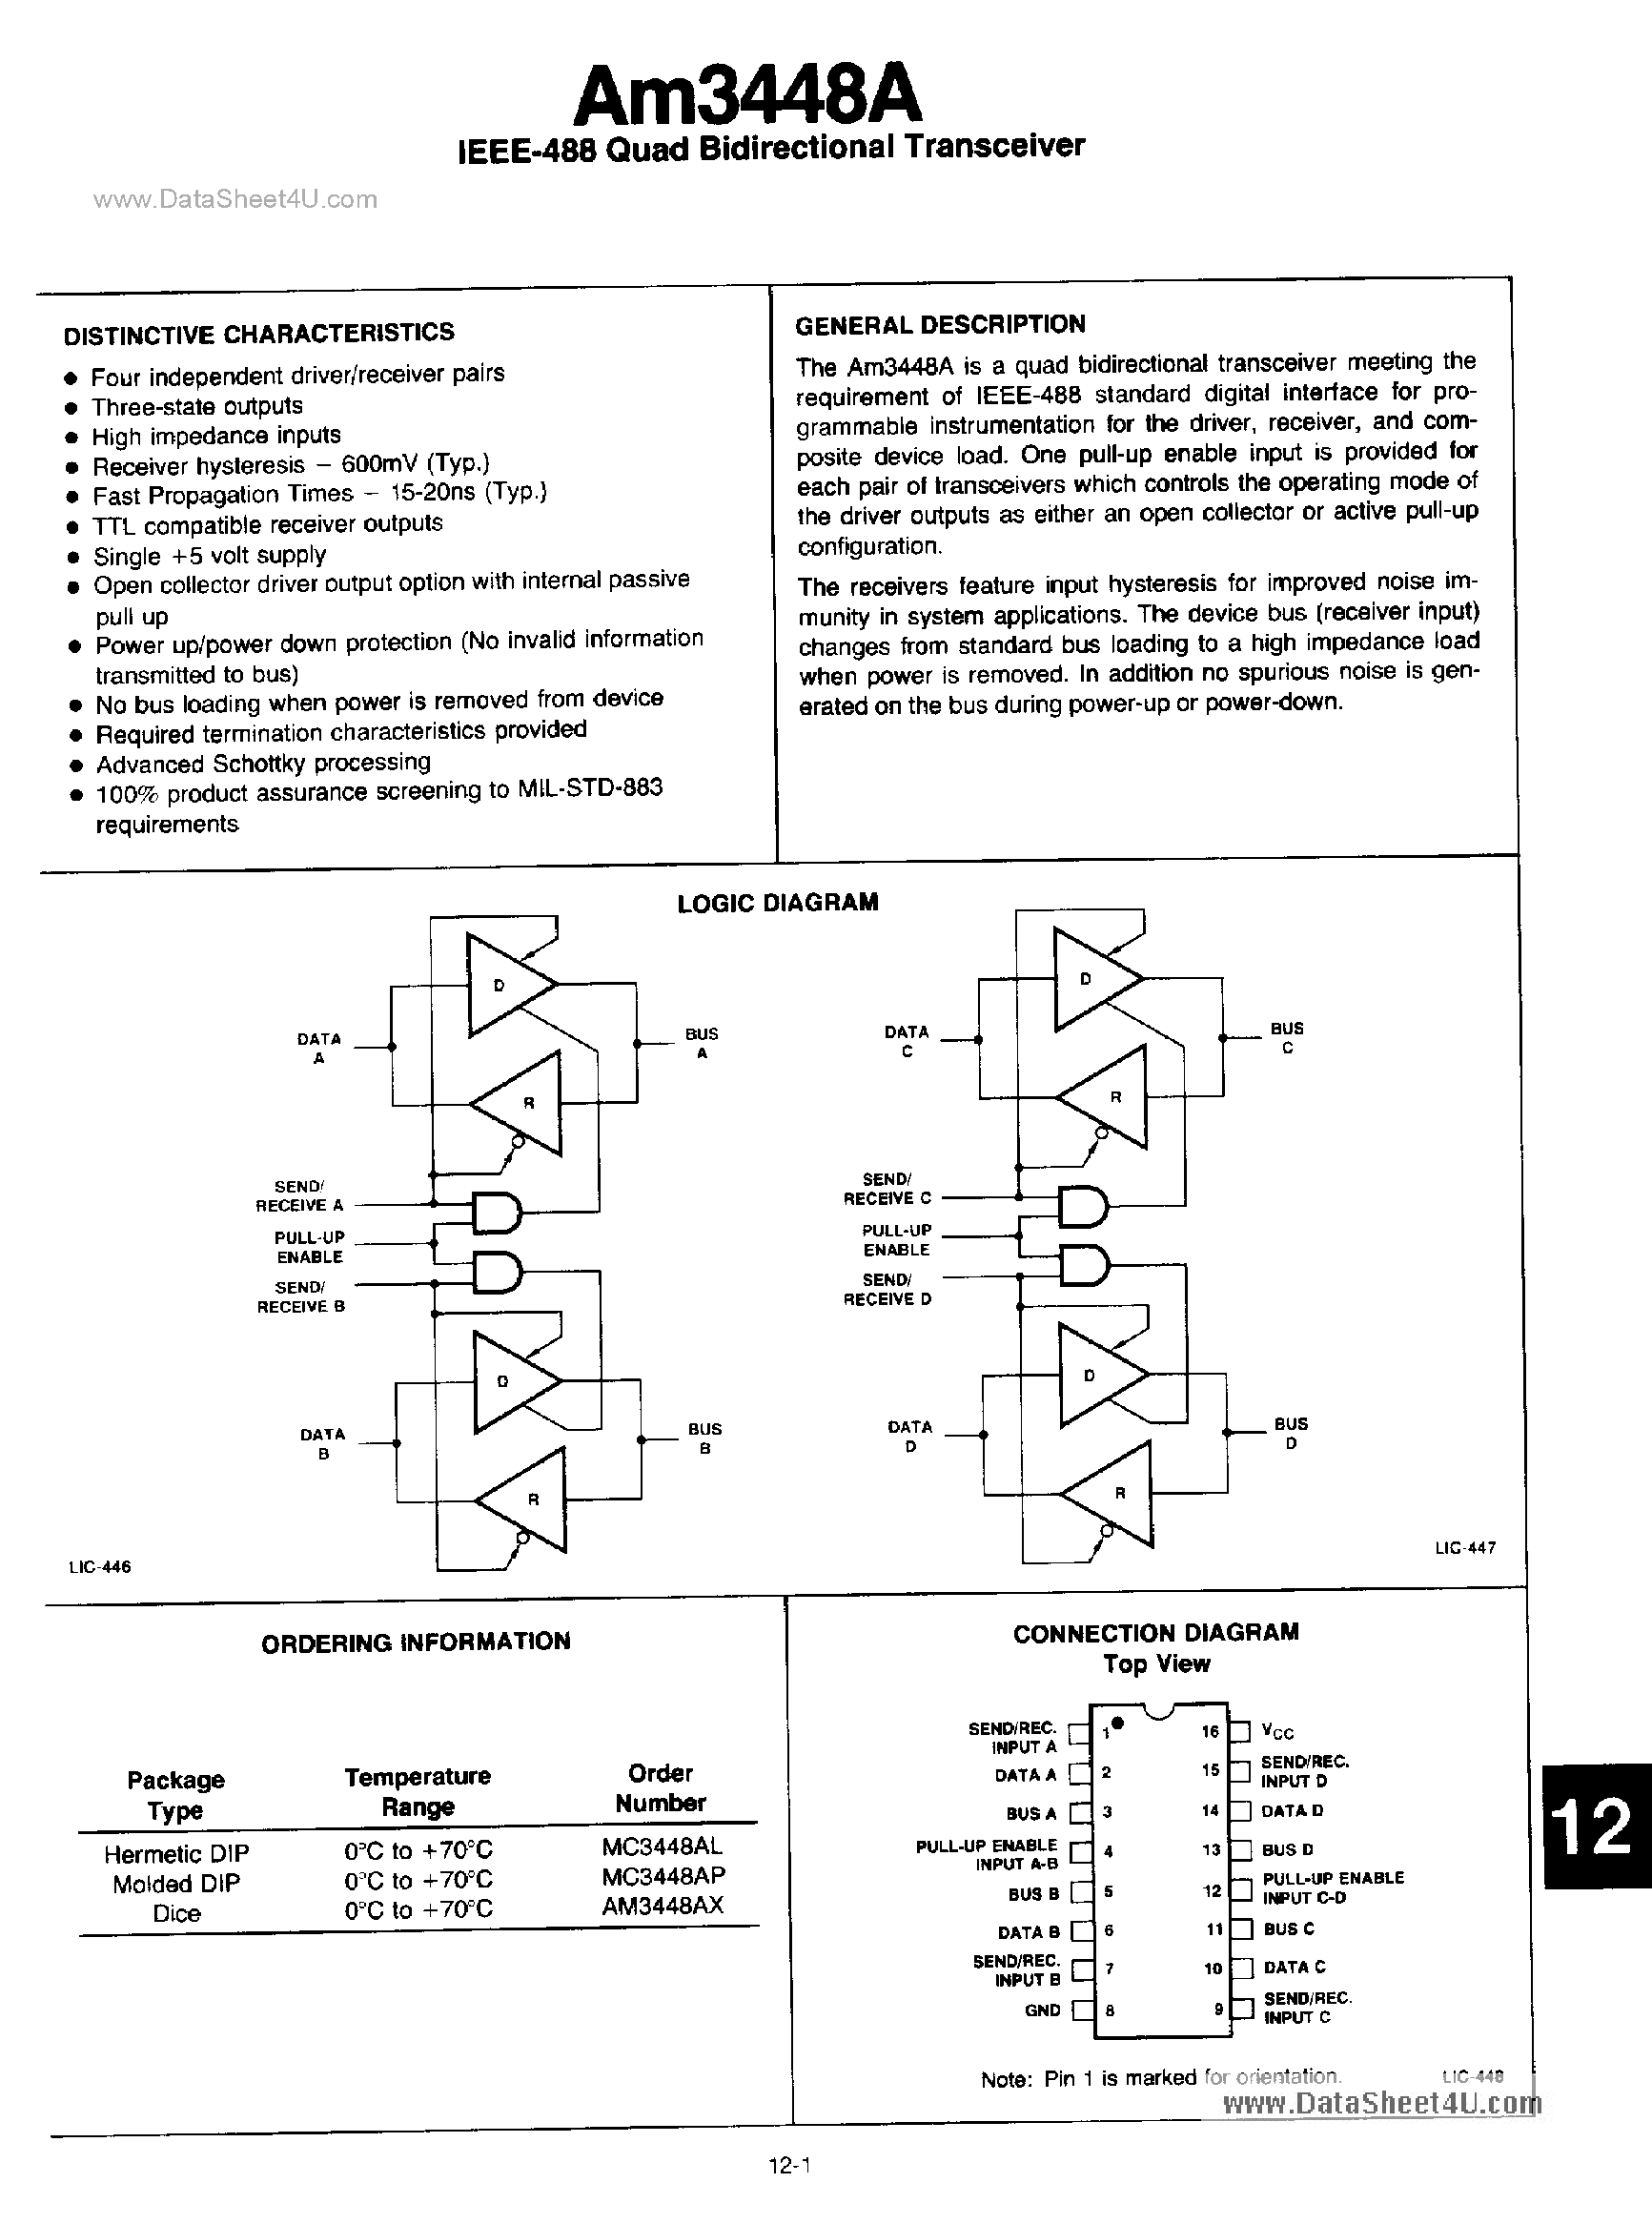 Datasheet AM3448A - IEEE-488 QUAD BIDIRECTIONAL TRANSCEIVER page 1